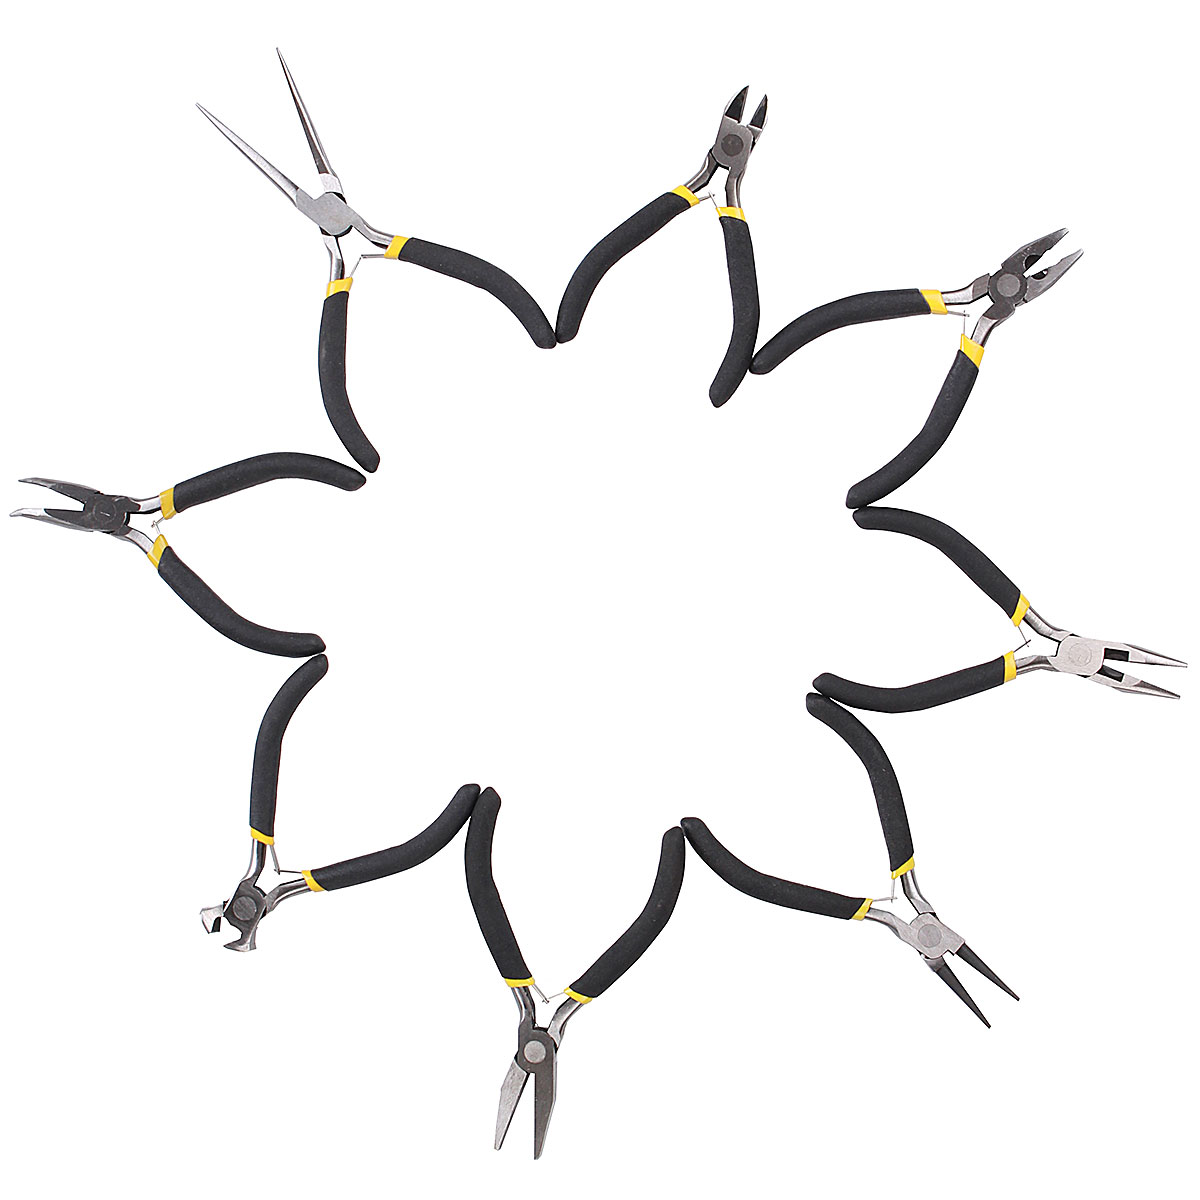 DANIU 8Pcs Round Beading Nose Pliers Wire Side Cutters Pliers Tools Set 13